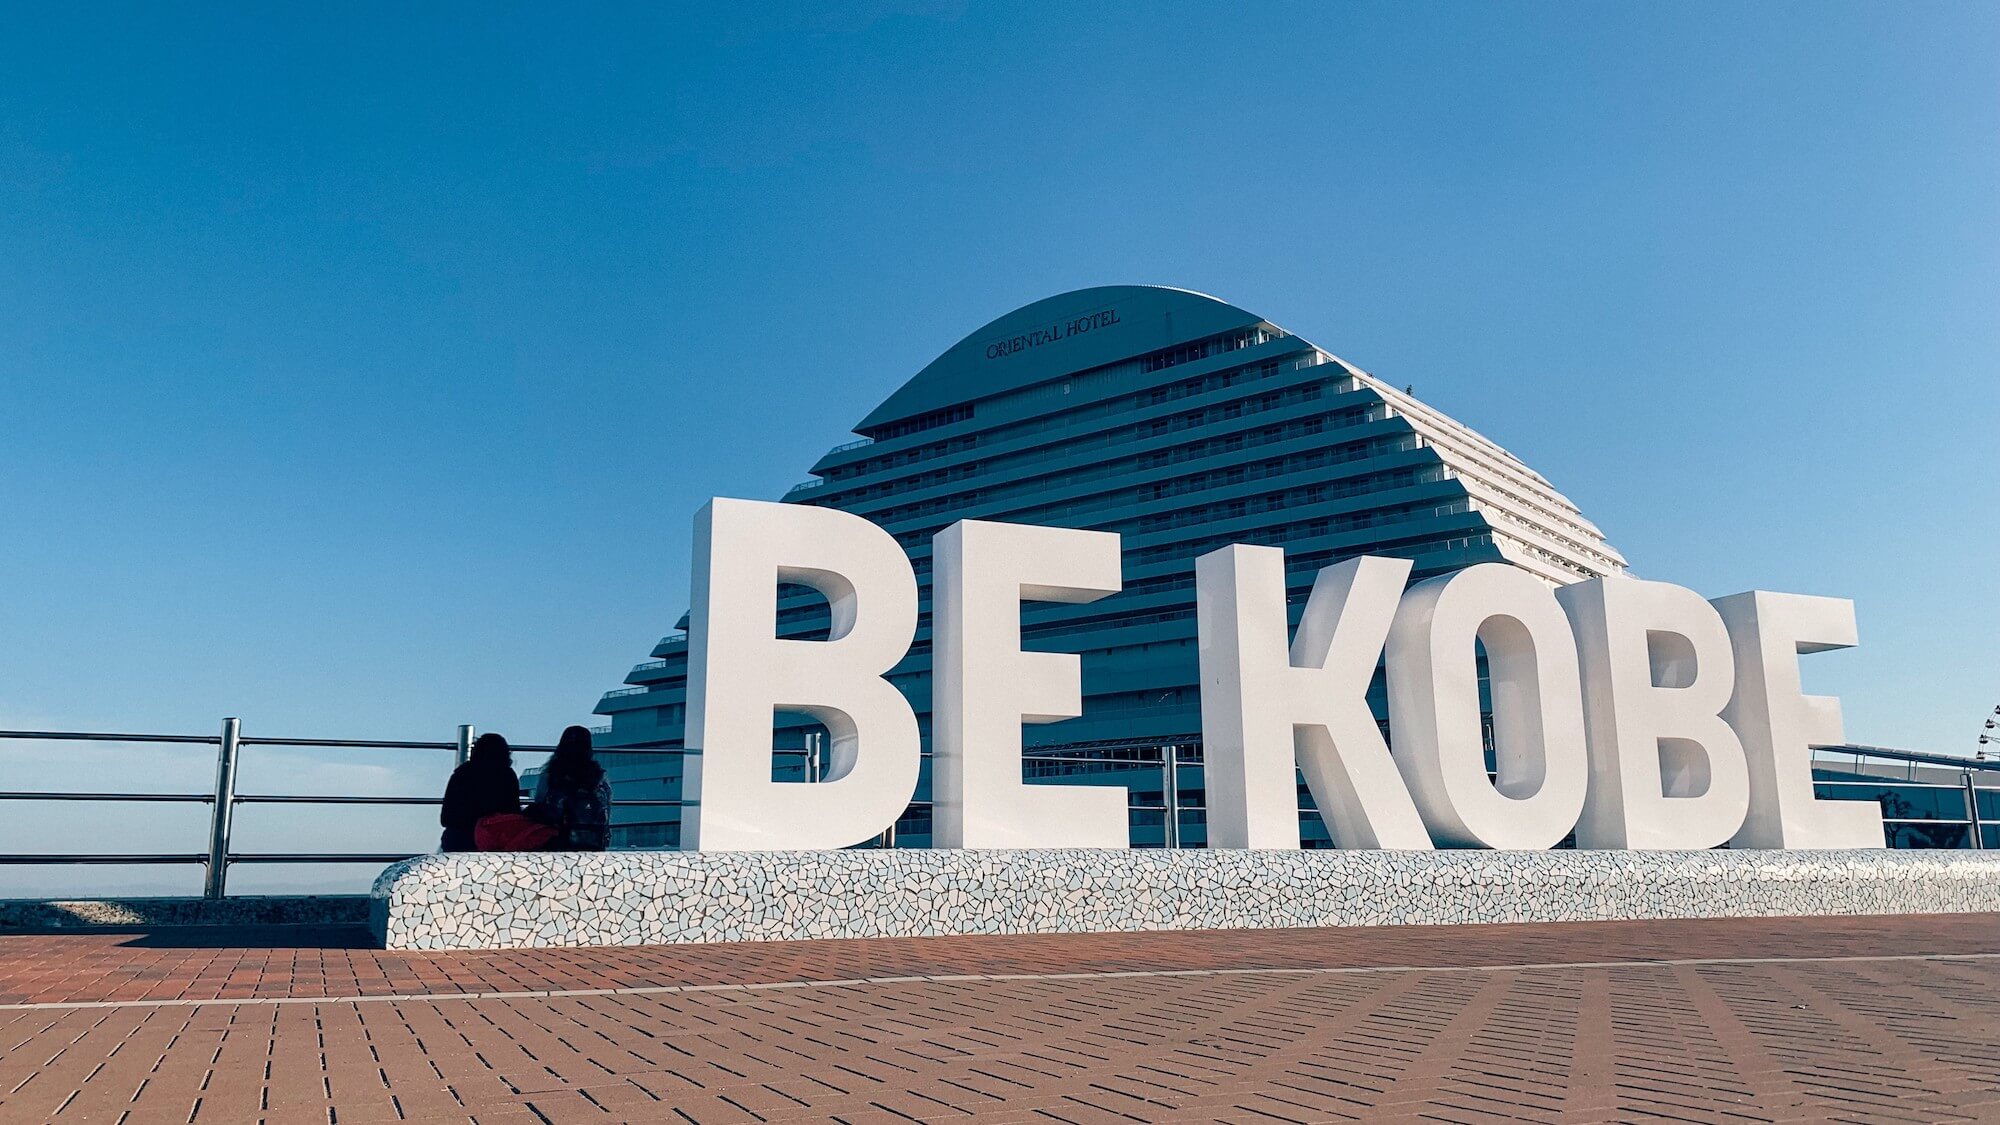 Large domed building with large white letters in front that say “Be Kobe”